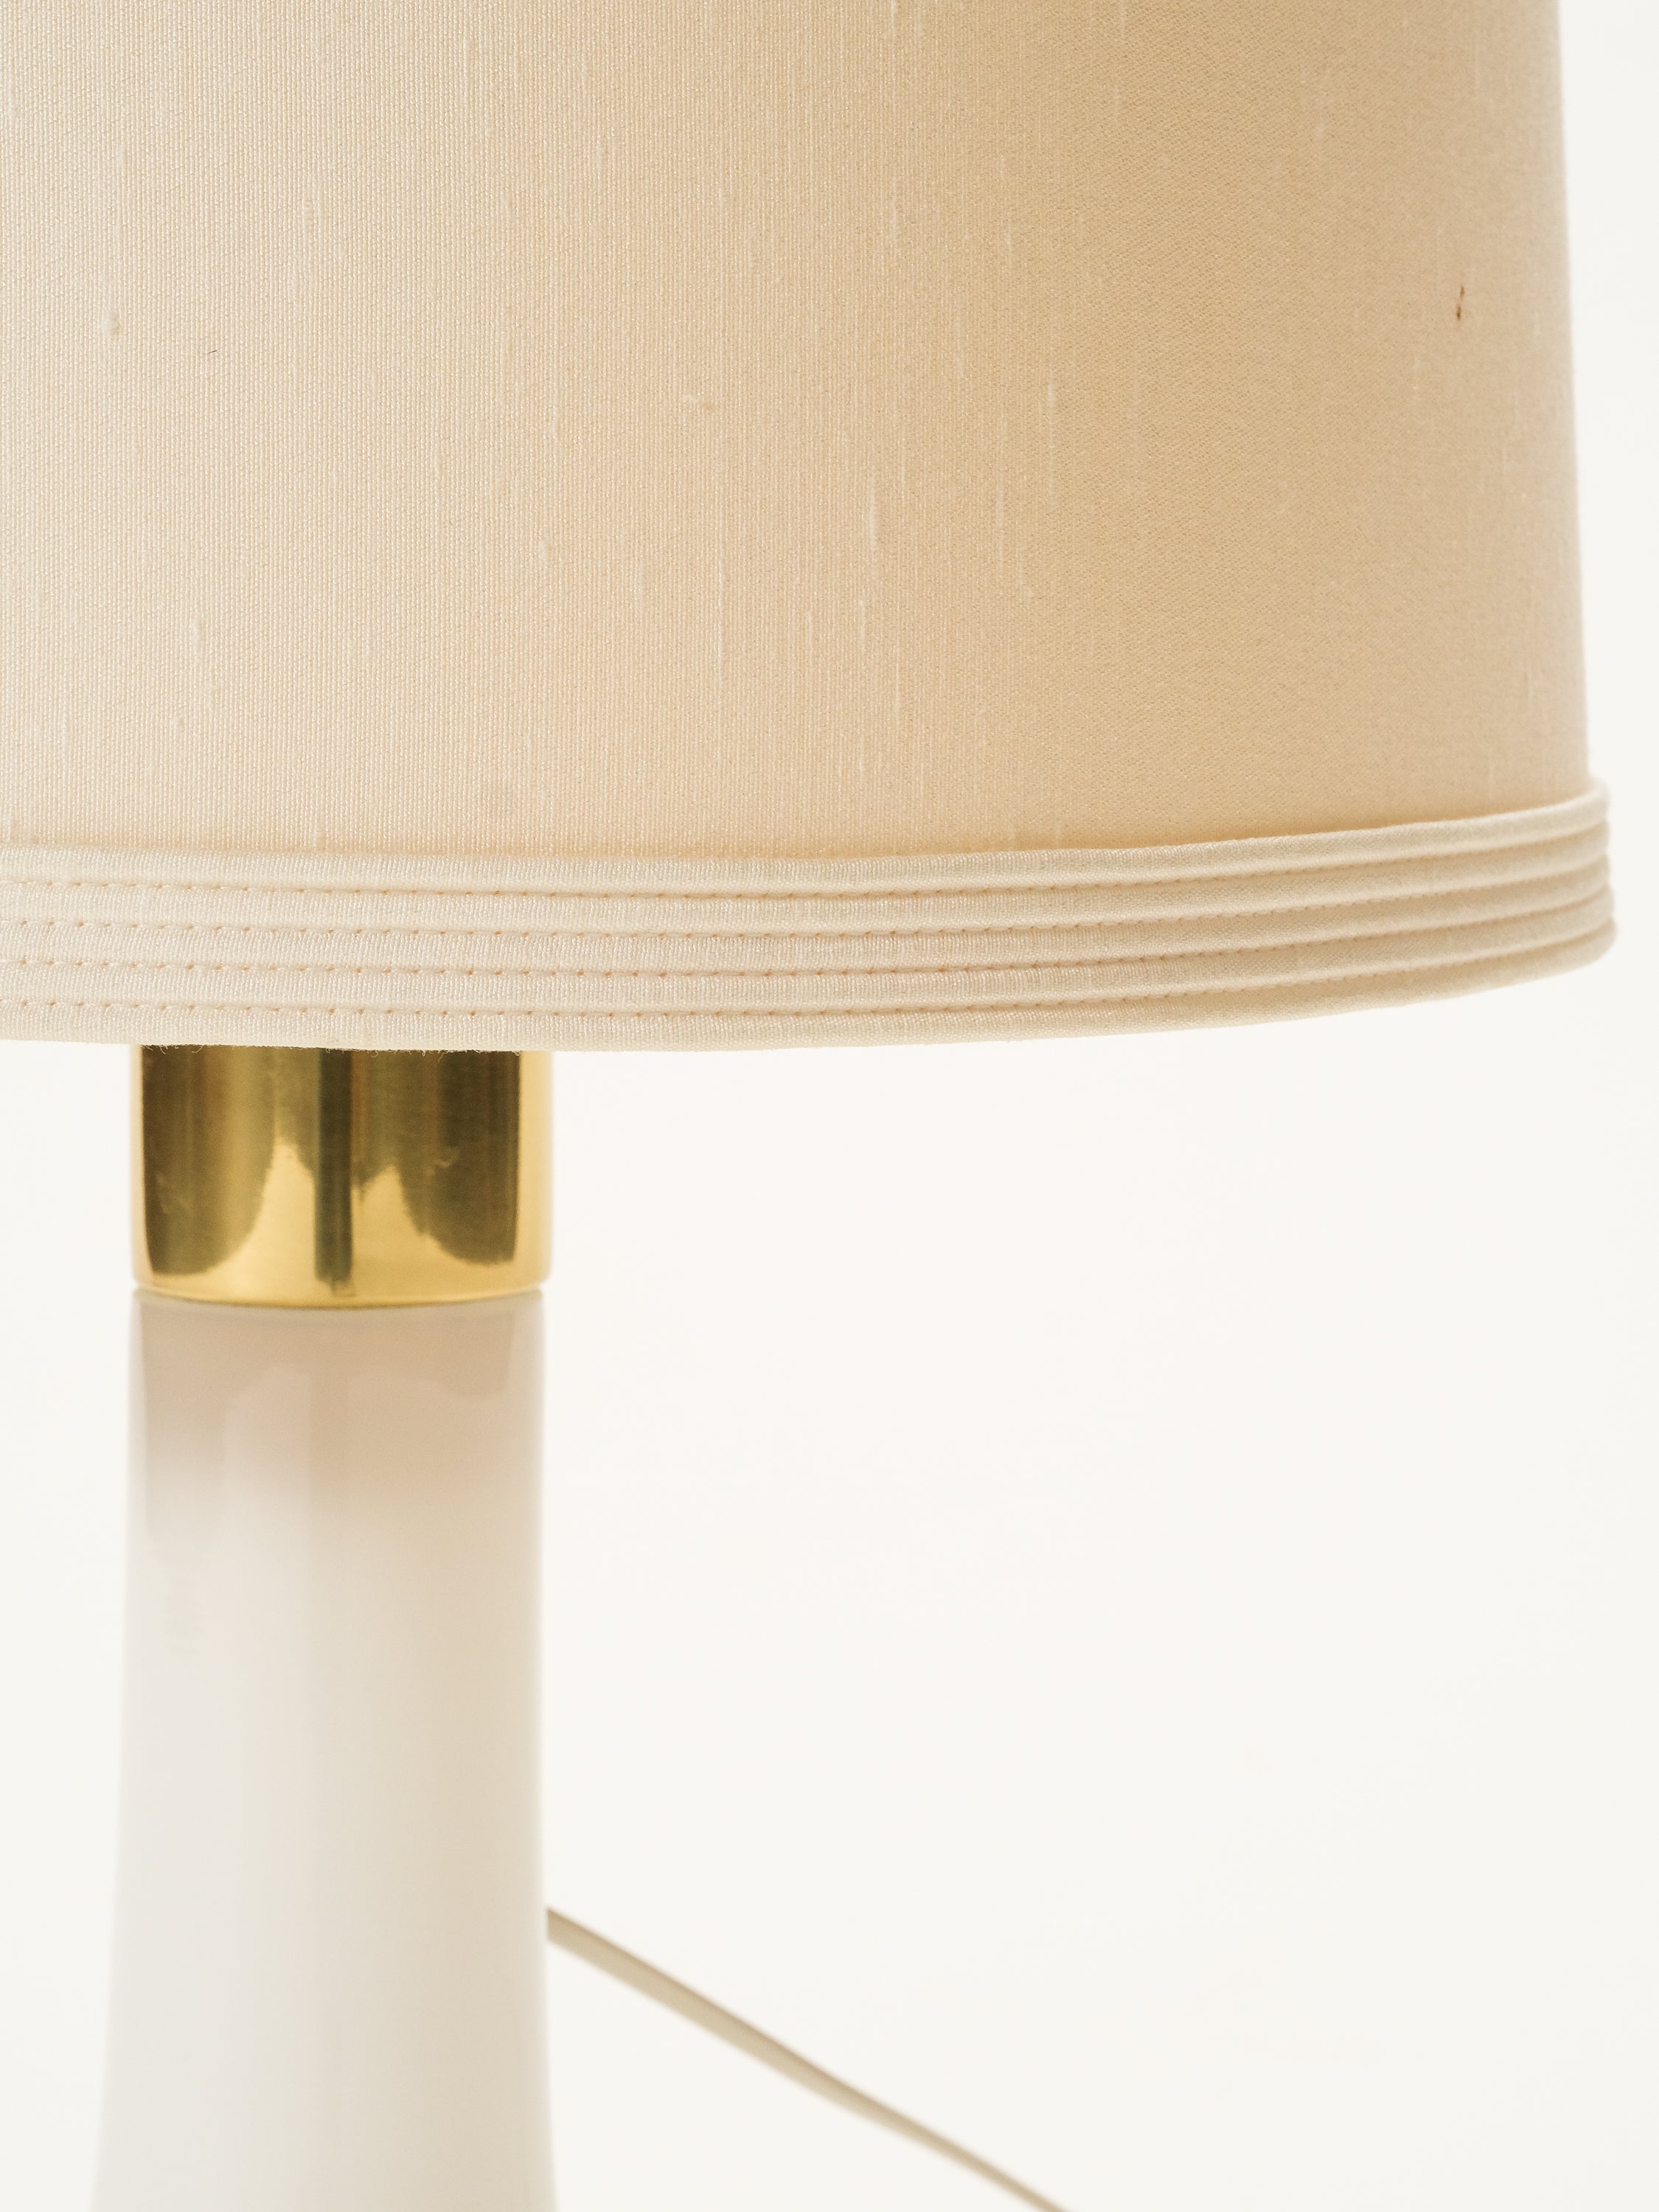 Table Lamp Model 46-017 by Lisa Johansson-Pape for Stockmann Orno, 1950s